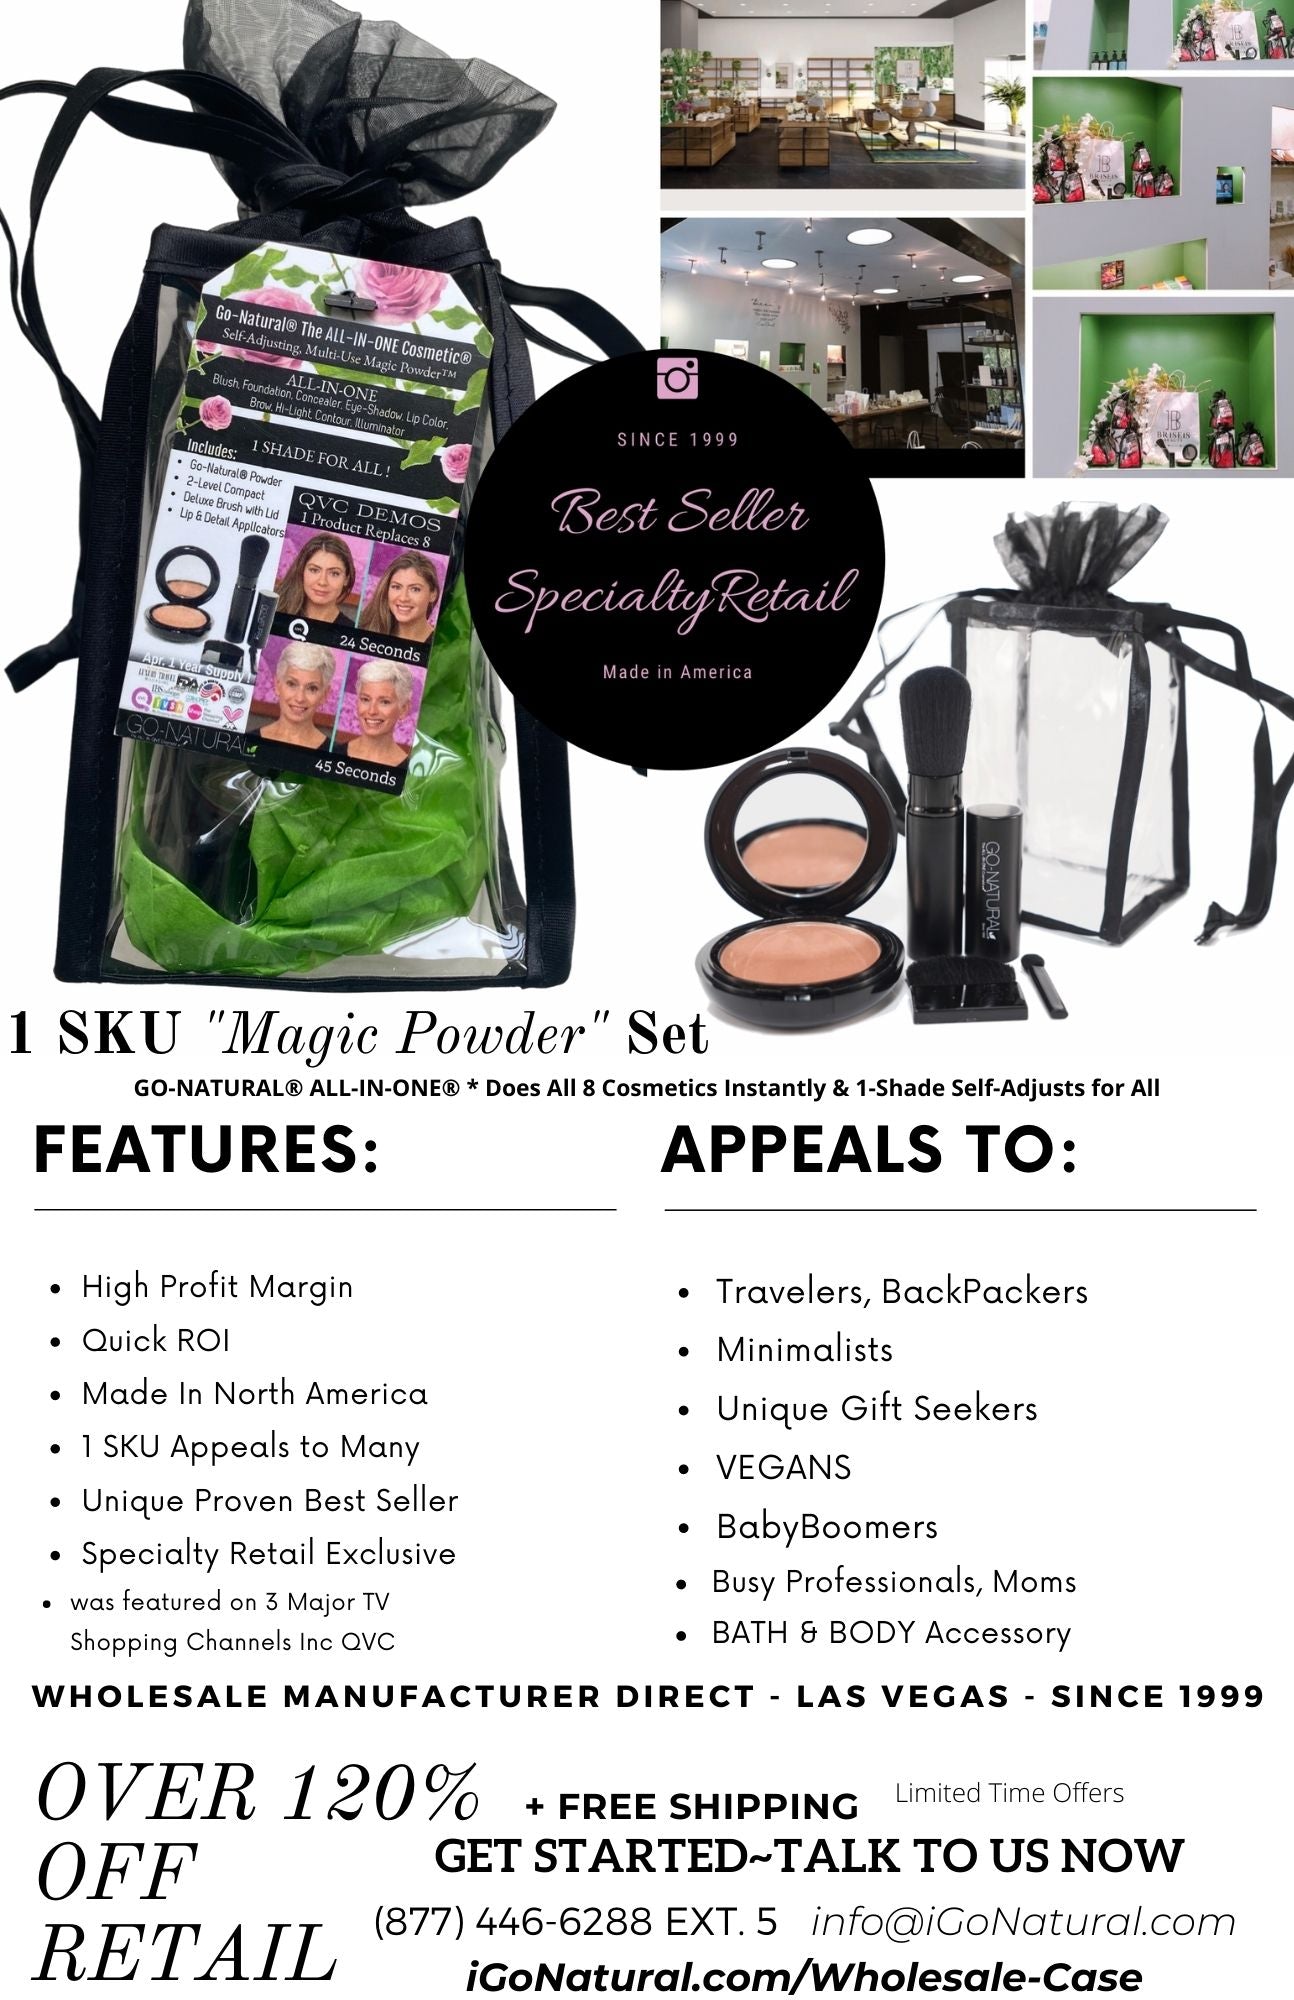 Wholesale Ad - Wholesale Best Seller  GO-NATURAL® ALL-IN-ONE Cosmetic® 1-Shade Multi-Use "Magic Powder" ™  Manufacturer Direct Specialty Retail & Professional Beauty Exclusive 